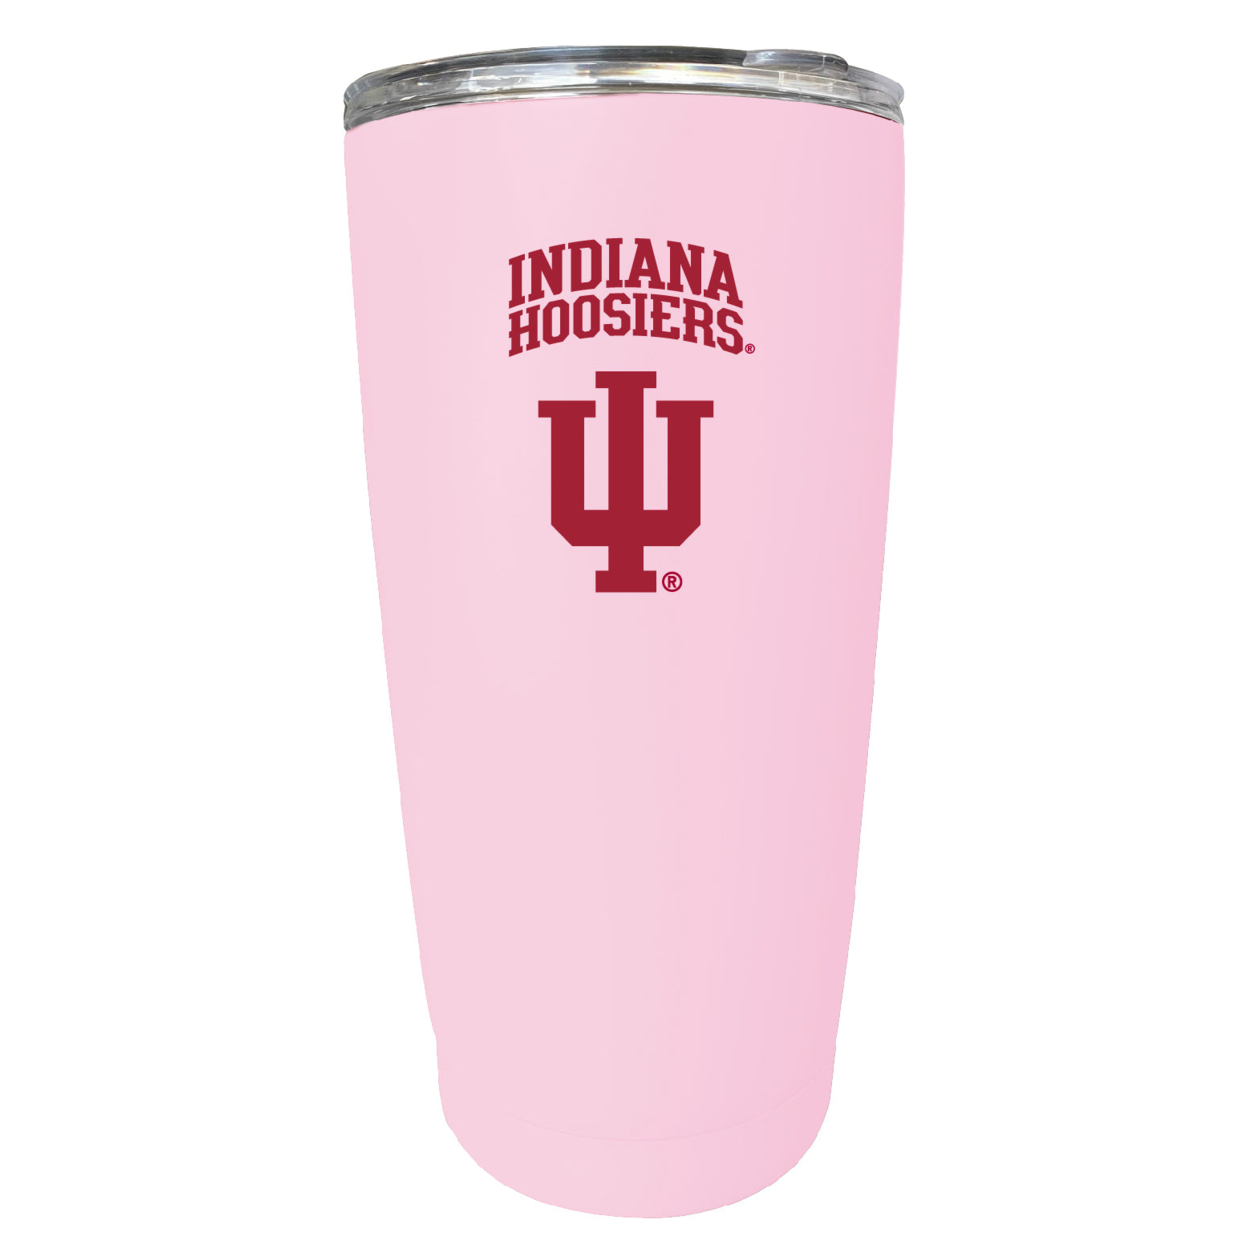 Indiana Hoosiers 16 Oz Stainless Steel Insulated Tumbler - Pink